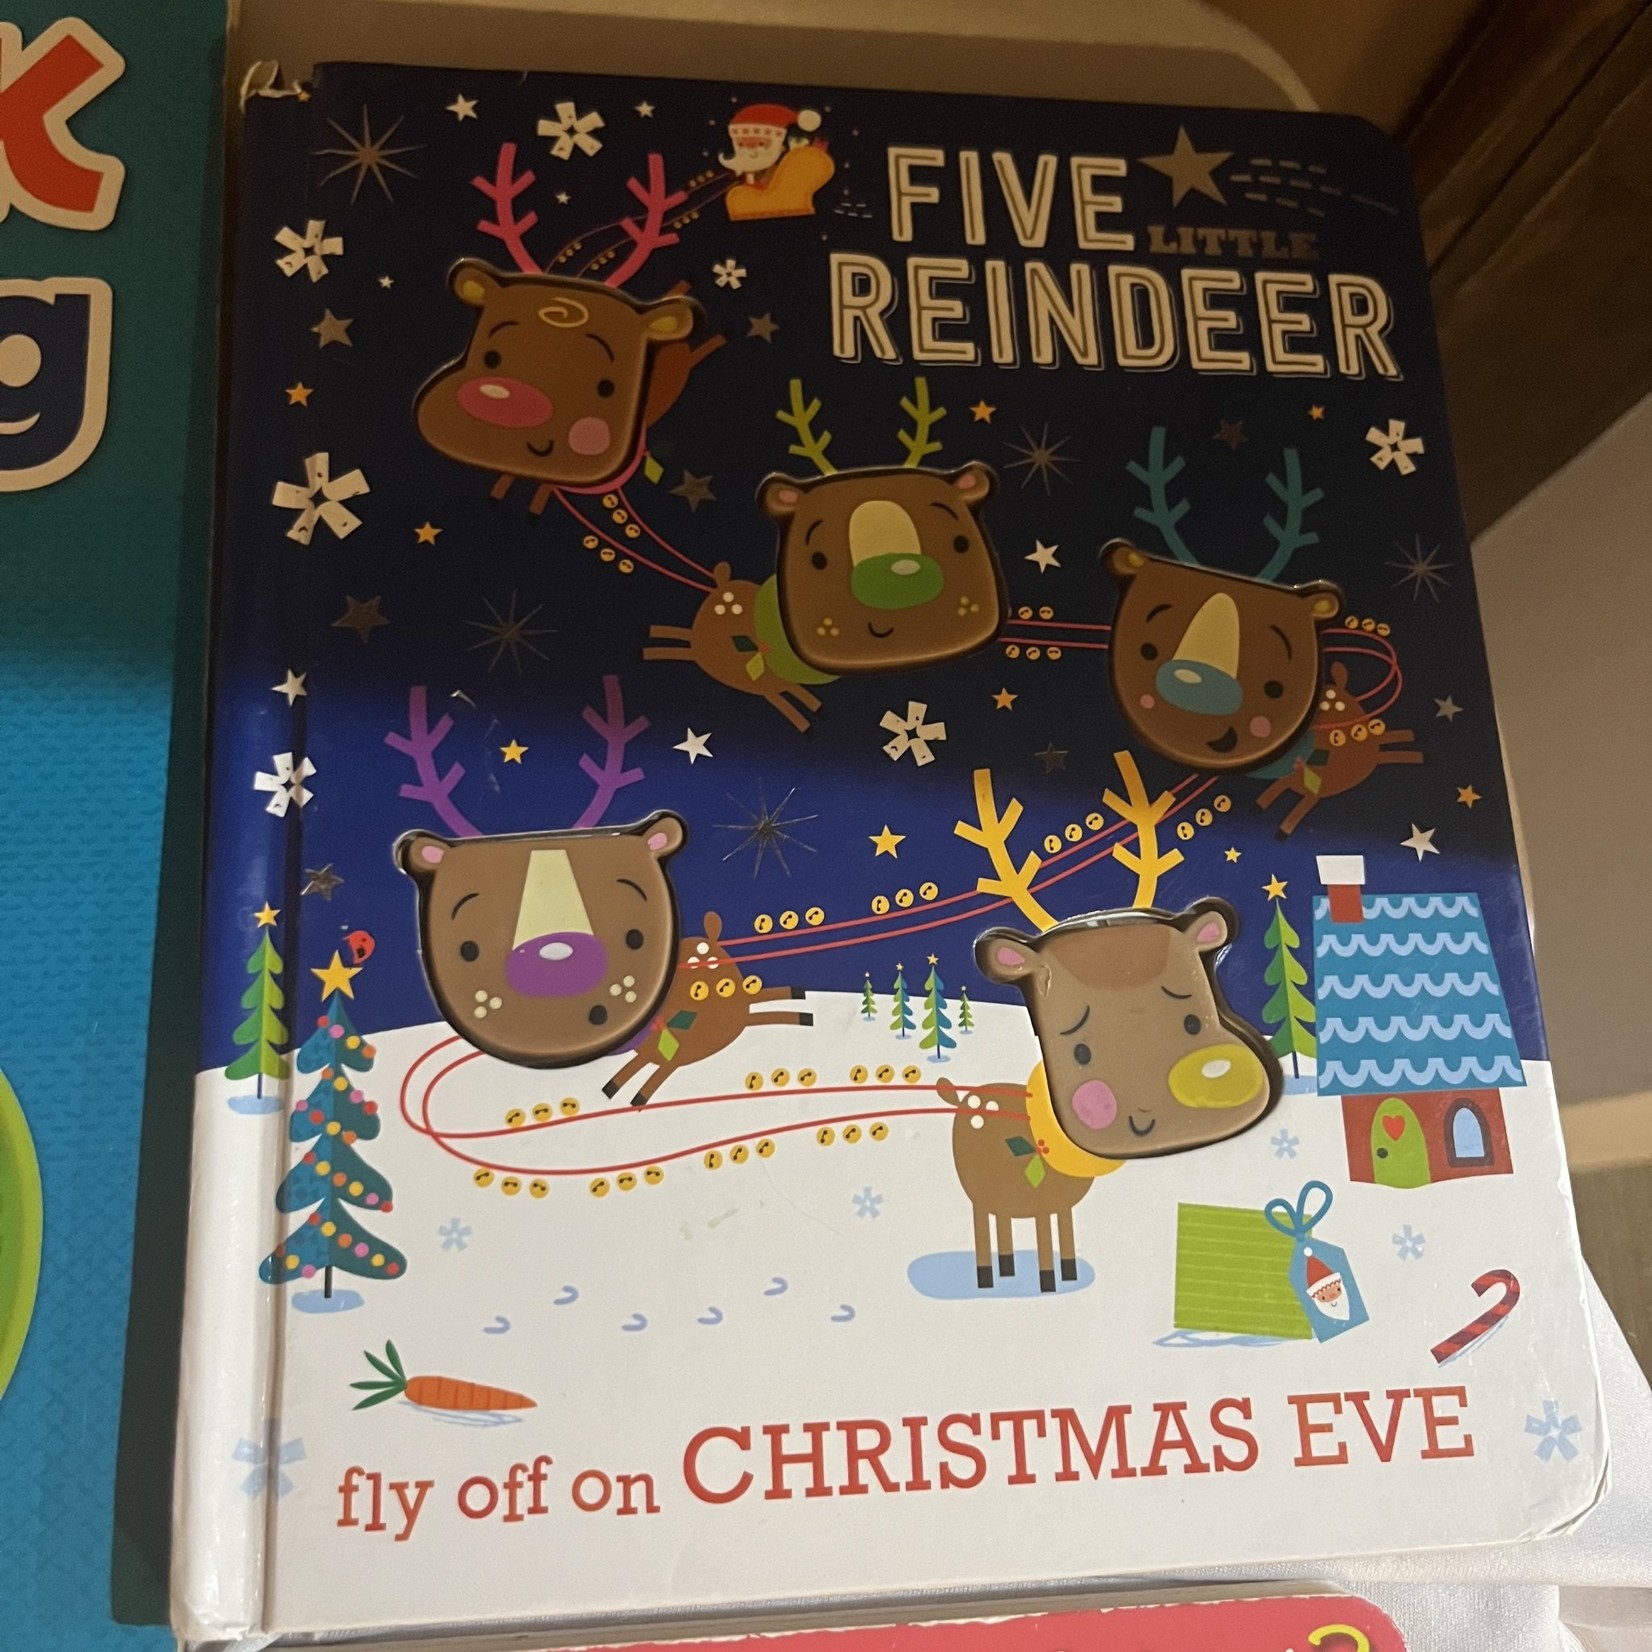 Five Reindeer Fly Off on Christmas Eve